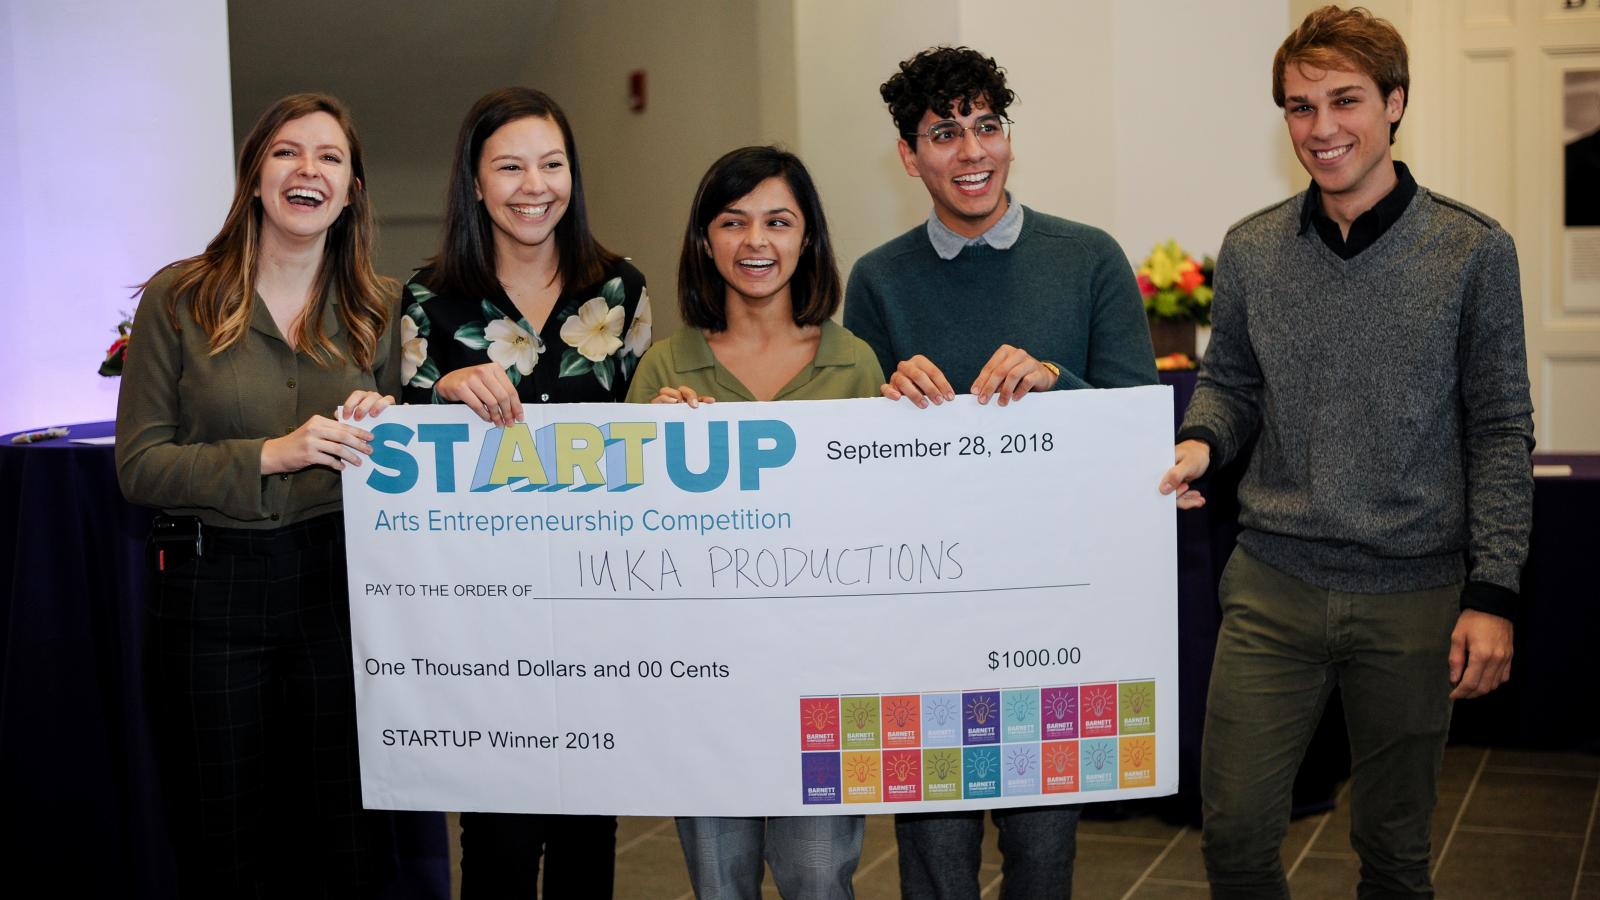 Iuka Productions student group, posing behind the $1,000 check they won at the StARTup competition at the 2018 Barnett Symposium. StARTup is Ohio State's first arts entrepreneurship competition.